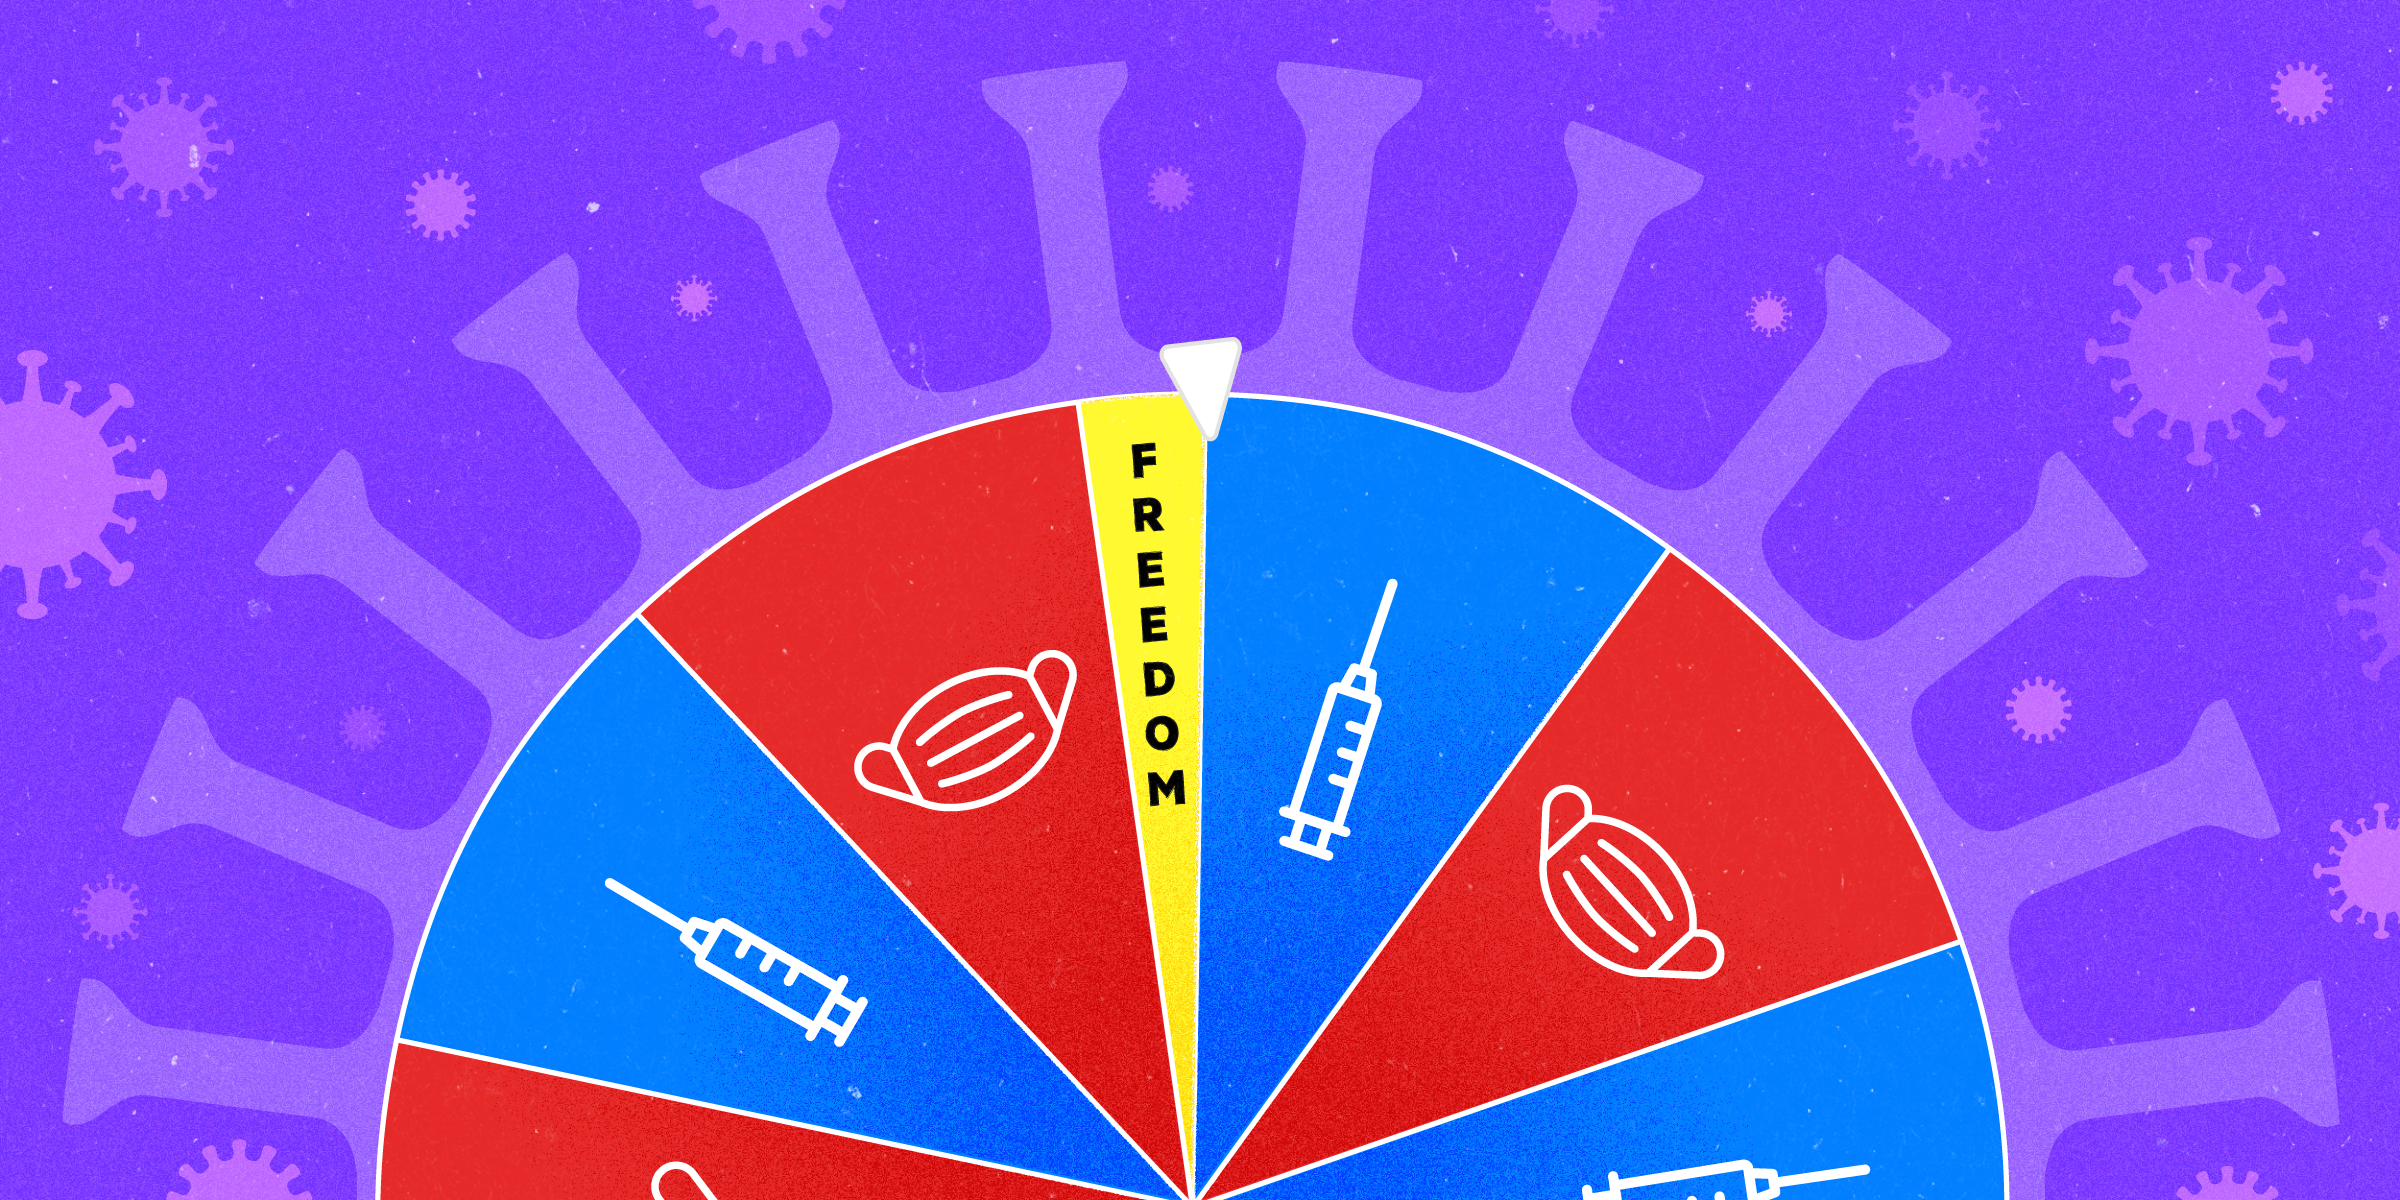 A spinning wheel with alternating blue and red vaccine and mask options and a single small yellow option labeled "FREEDOM." The background is purple and smaller coronavirus shapes are scattered around.